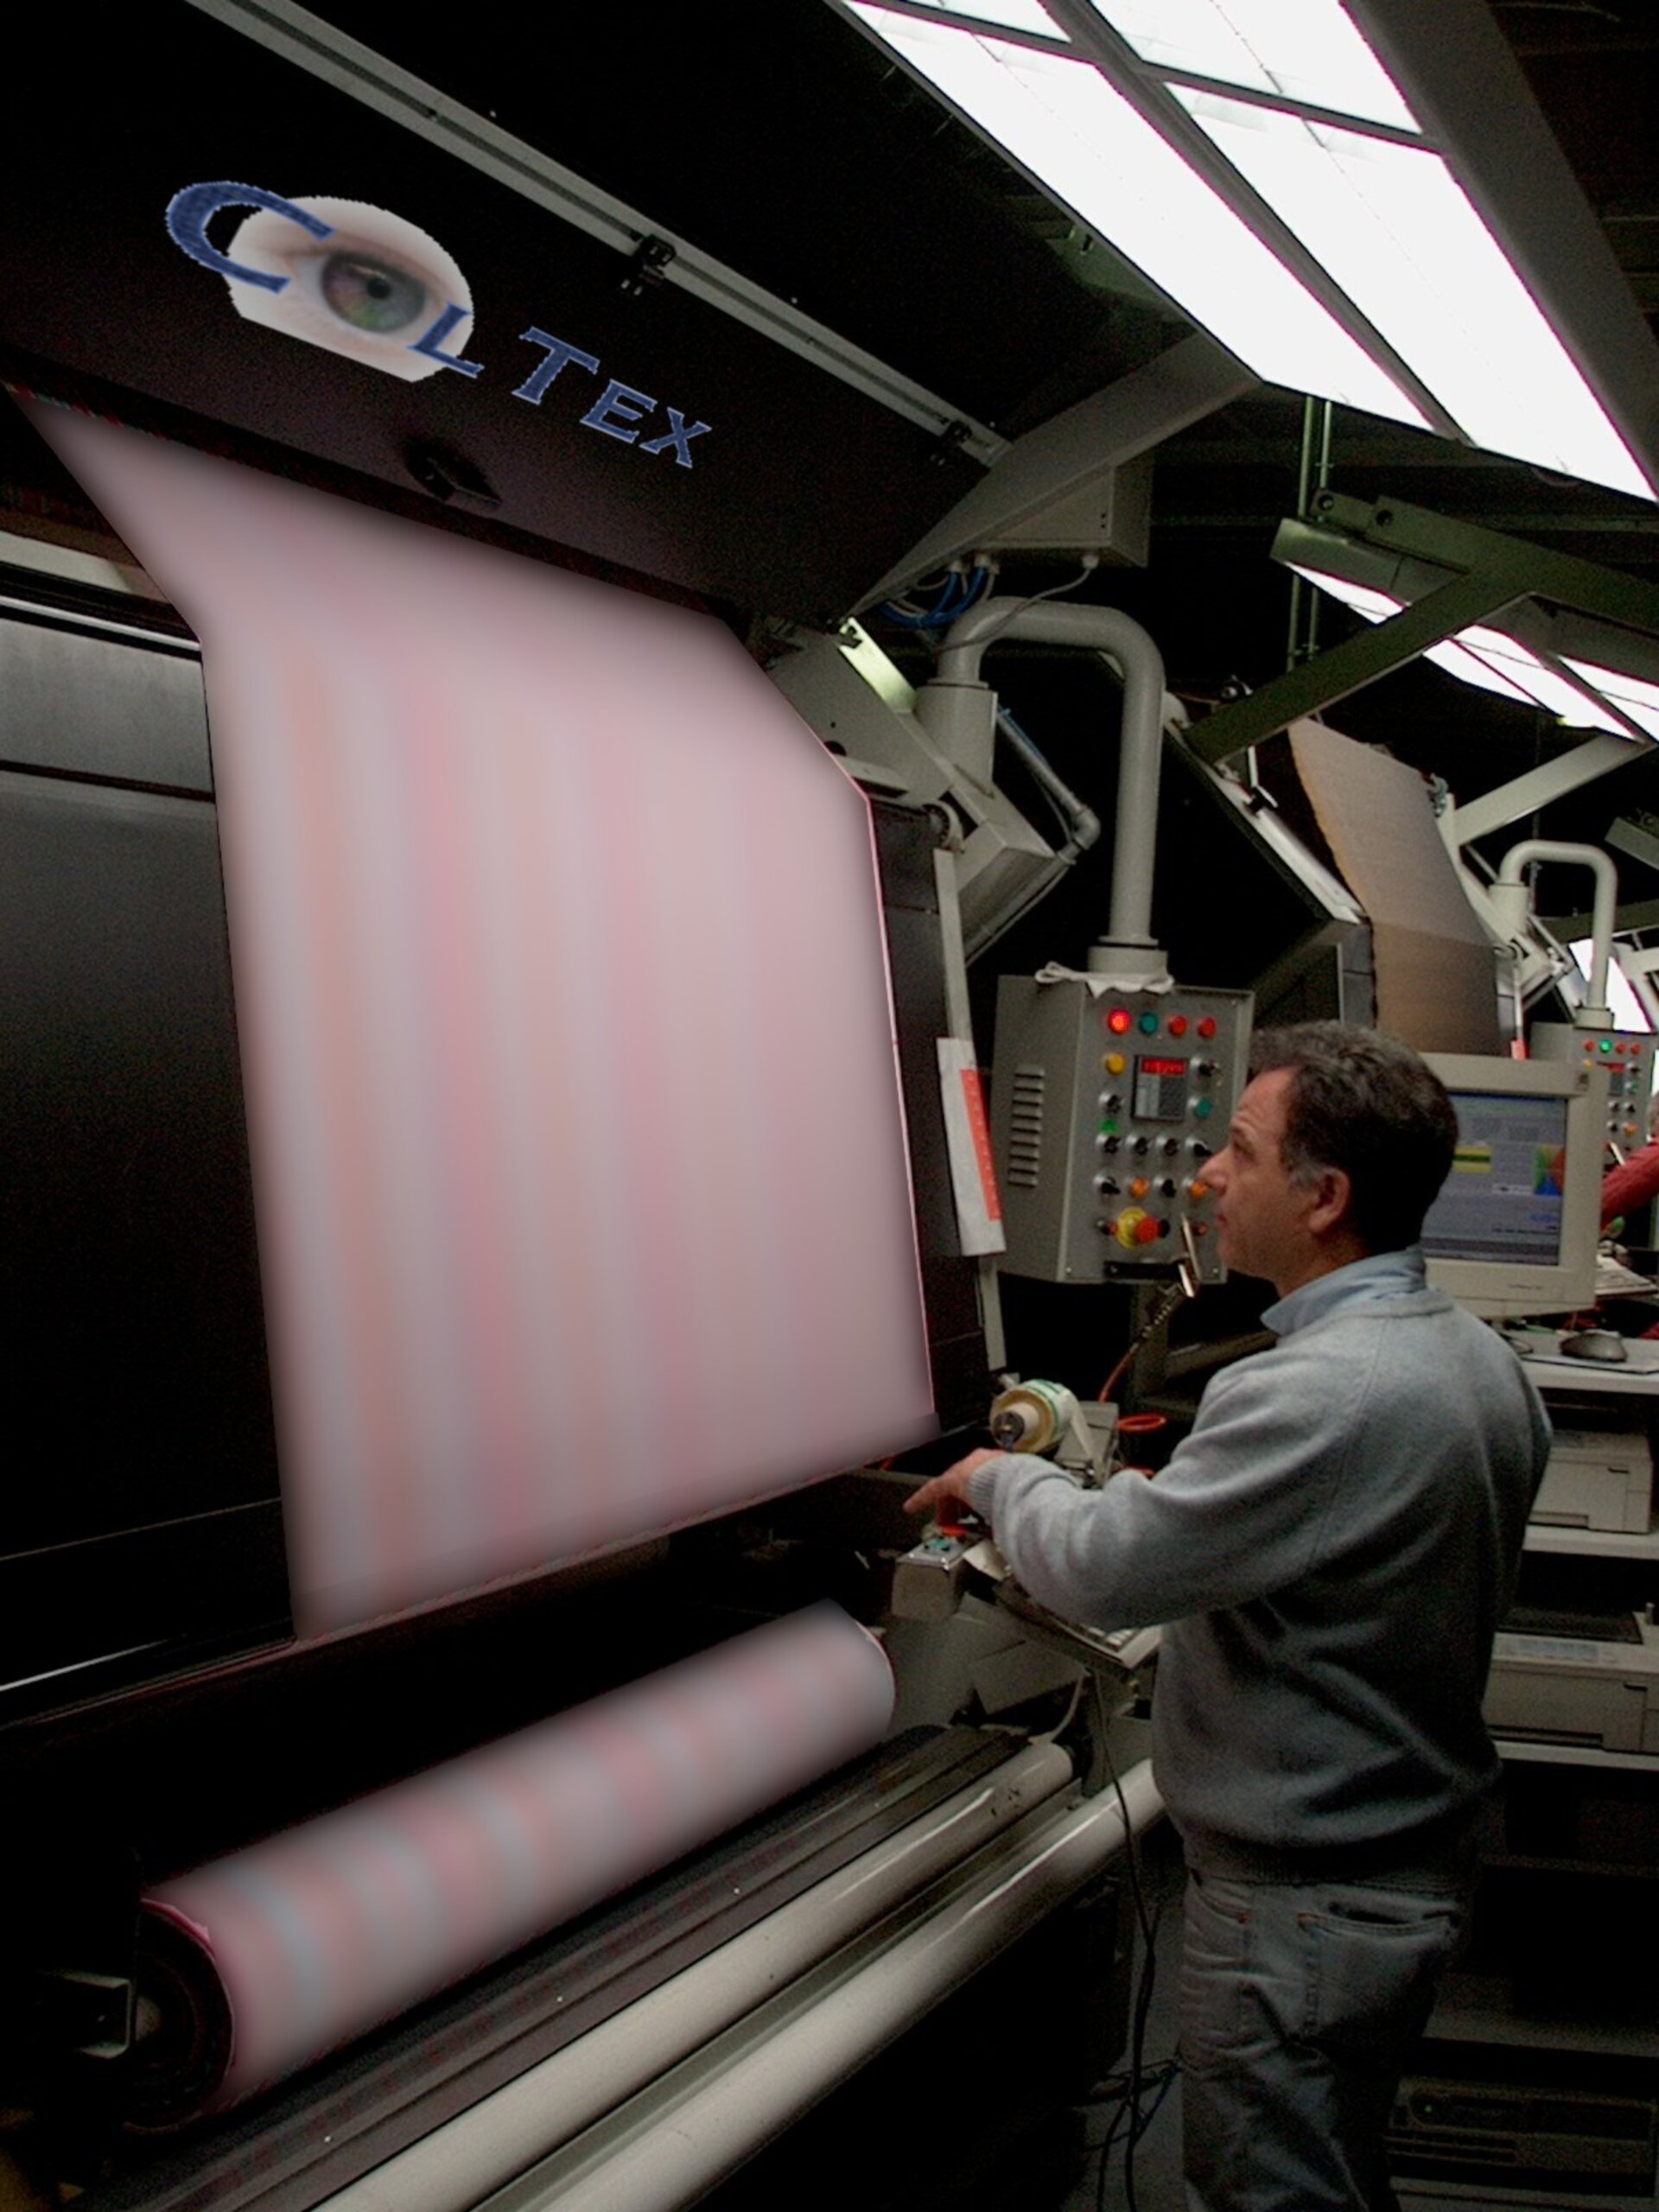 Textile production monitored by a 'space eye'